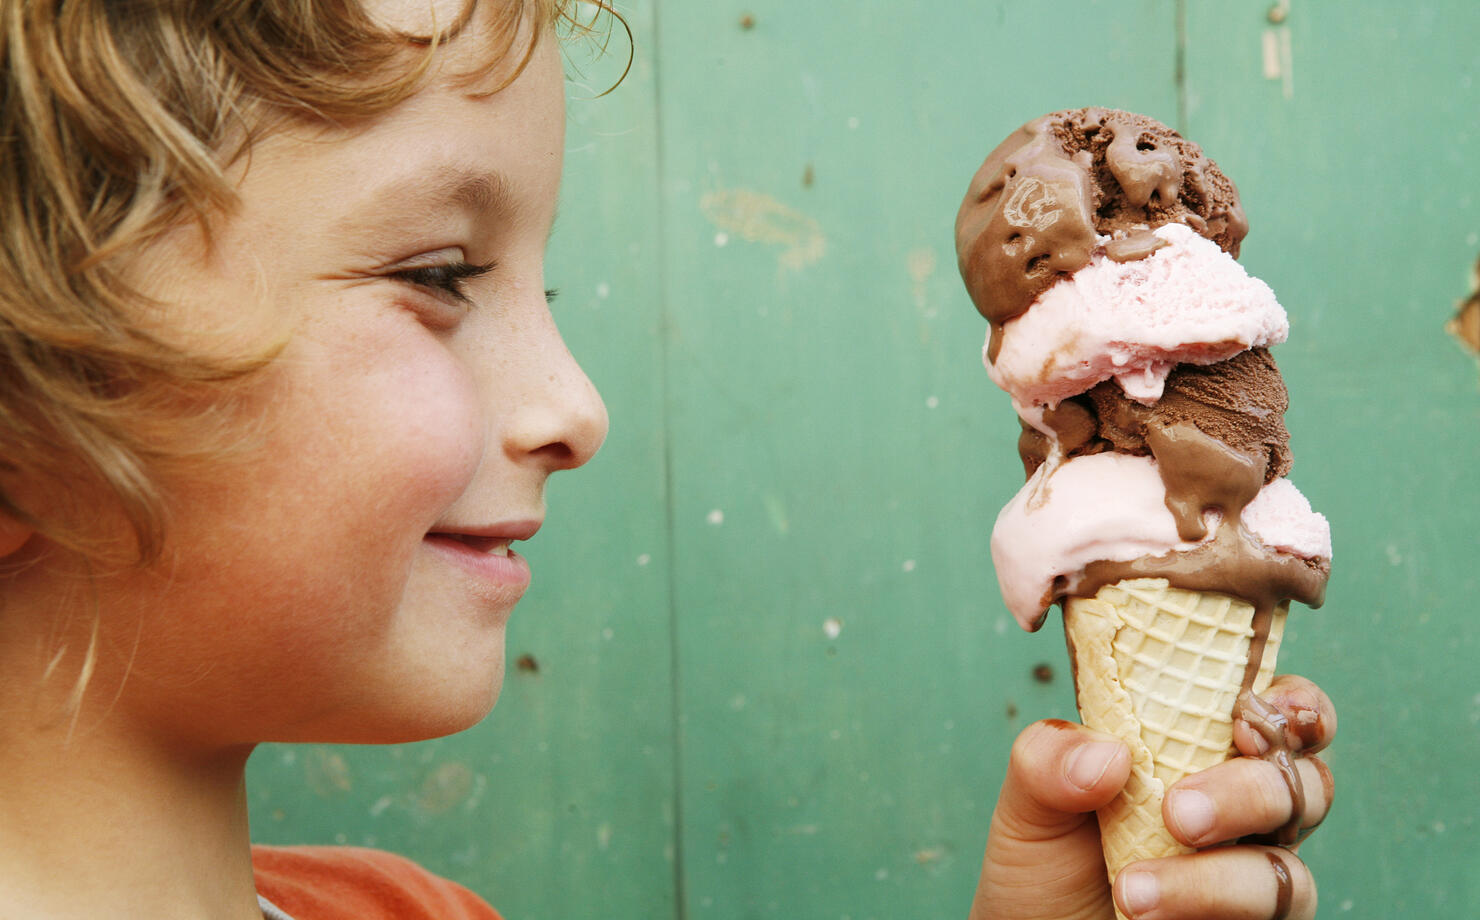 Close up of boy (6-7) holding ice cream cone, side view